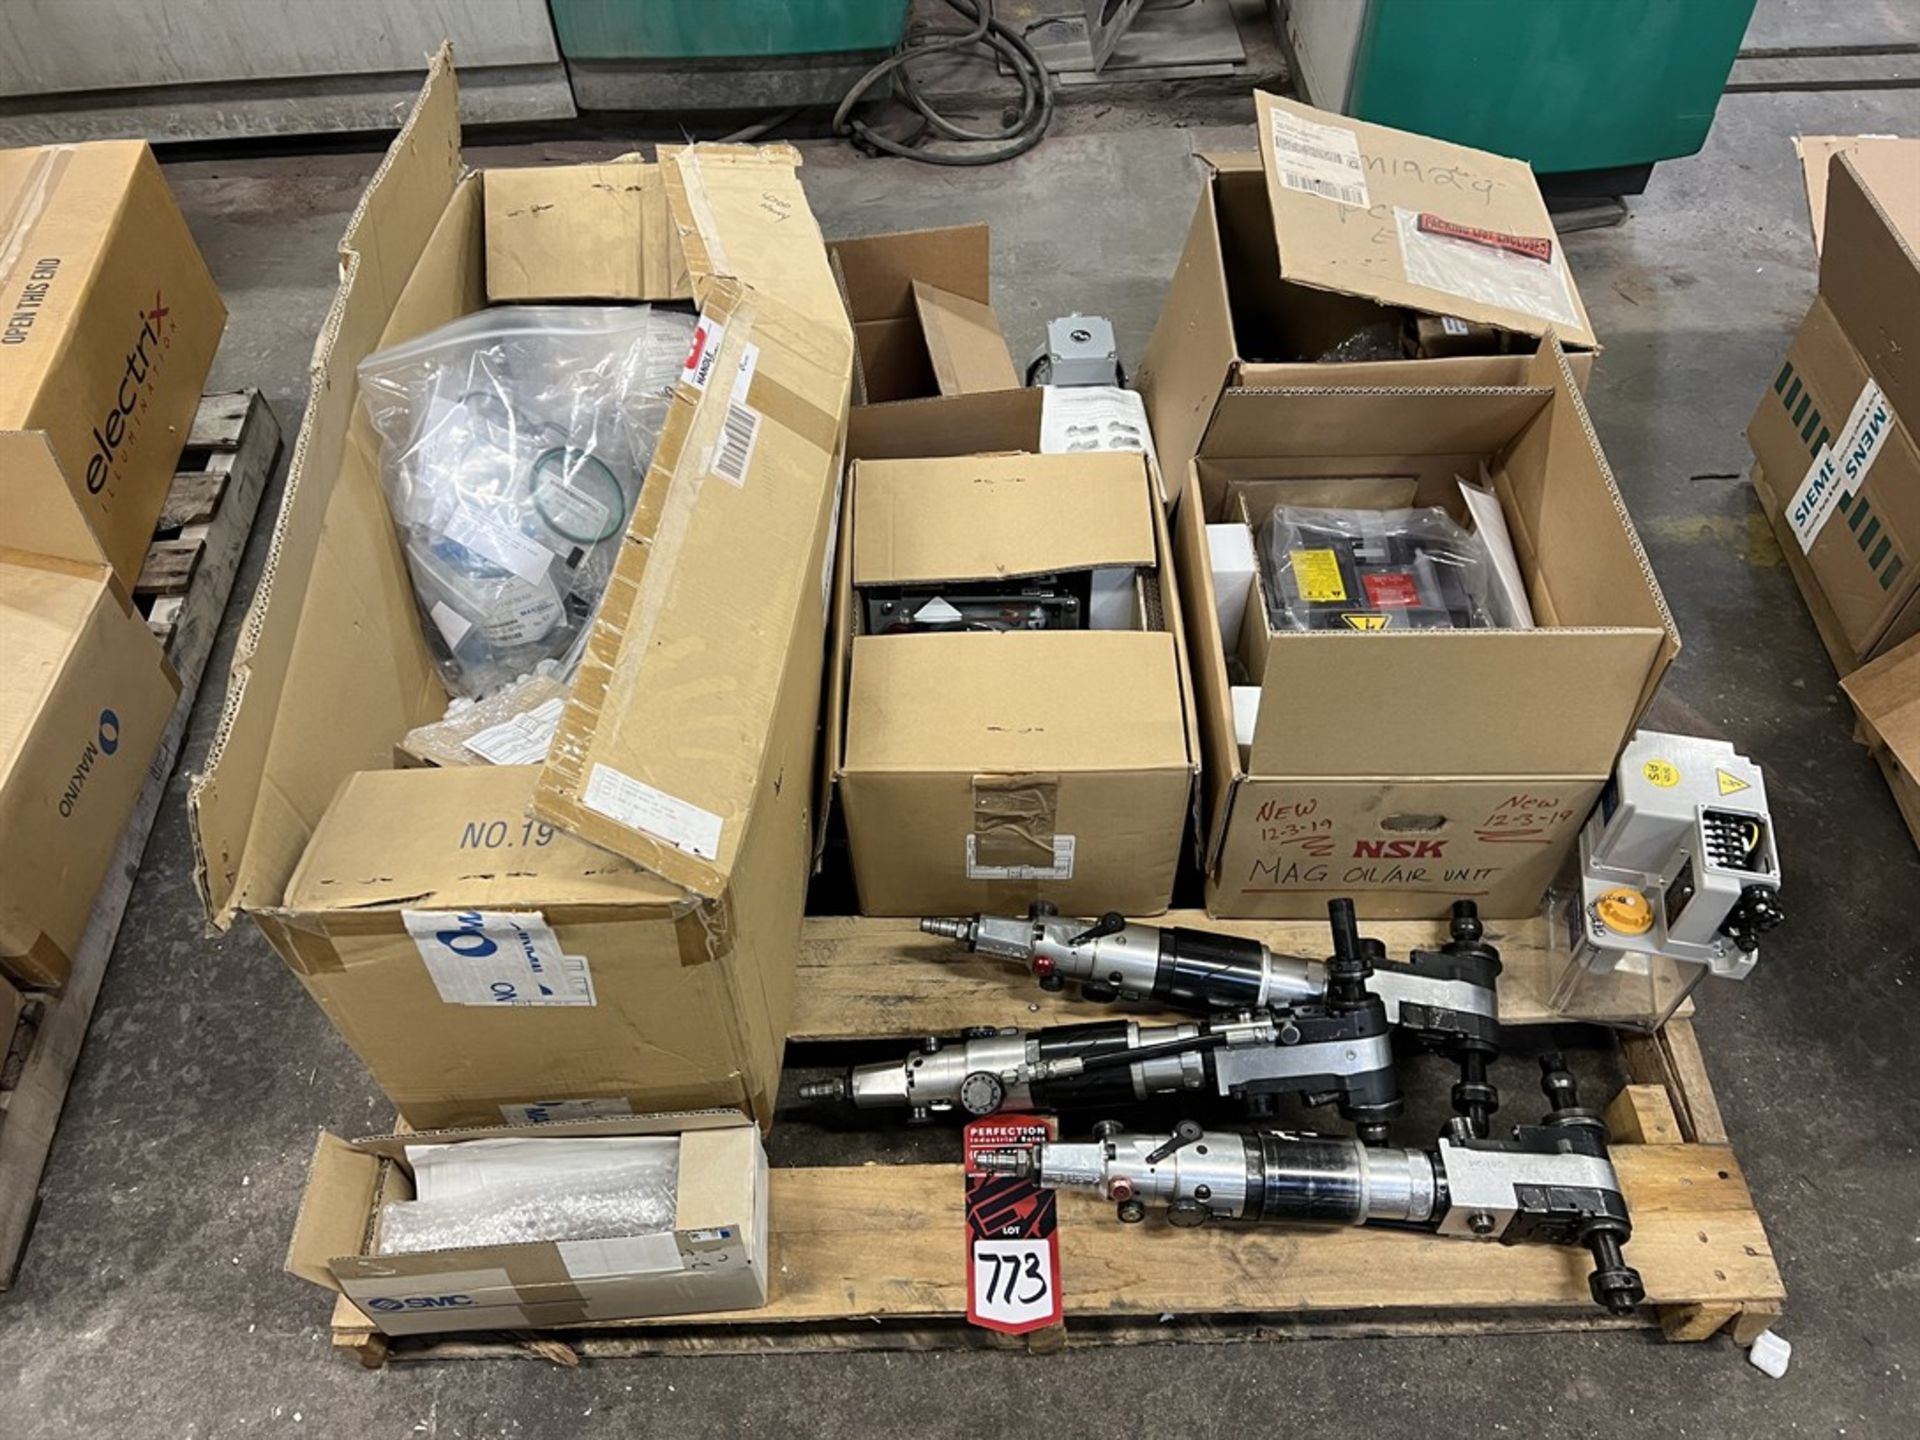 Lot of MAKINO Spare Parts Including NSK Oil/Air Units, Pressure Switches, Relays, and Gear Motors